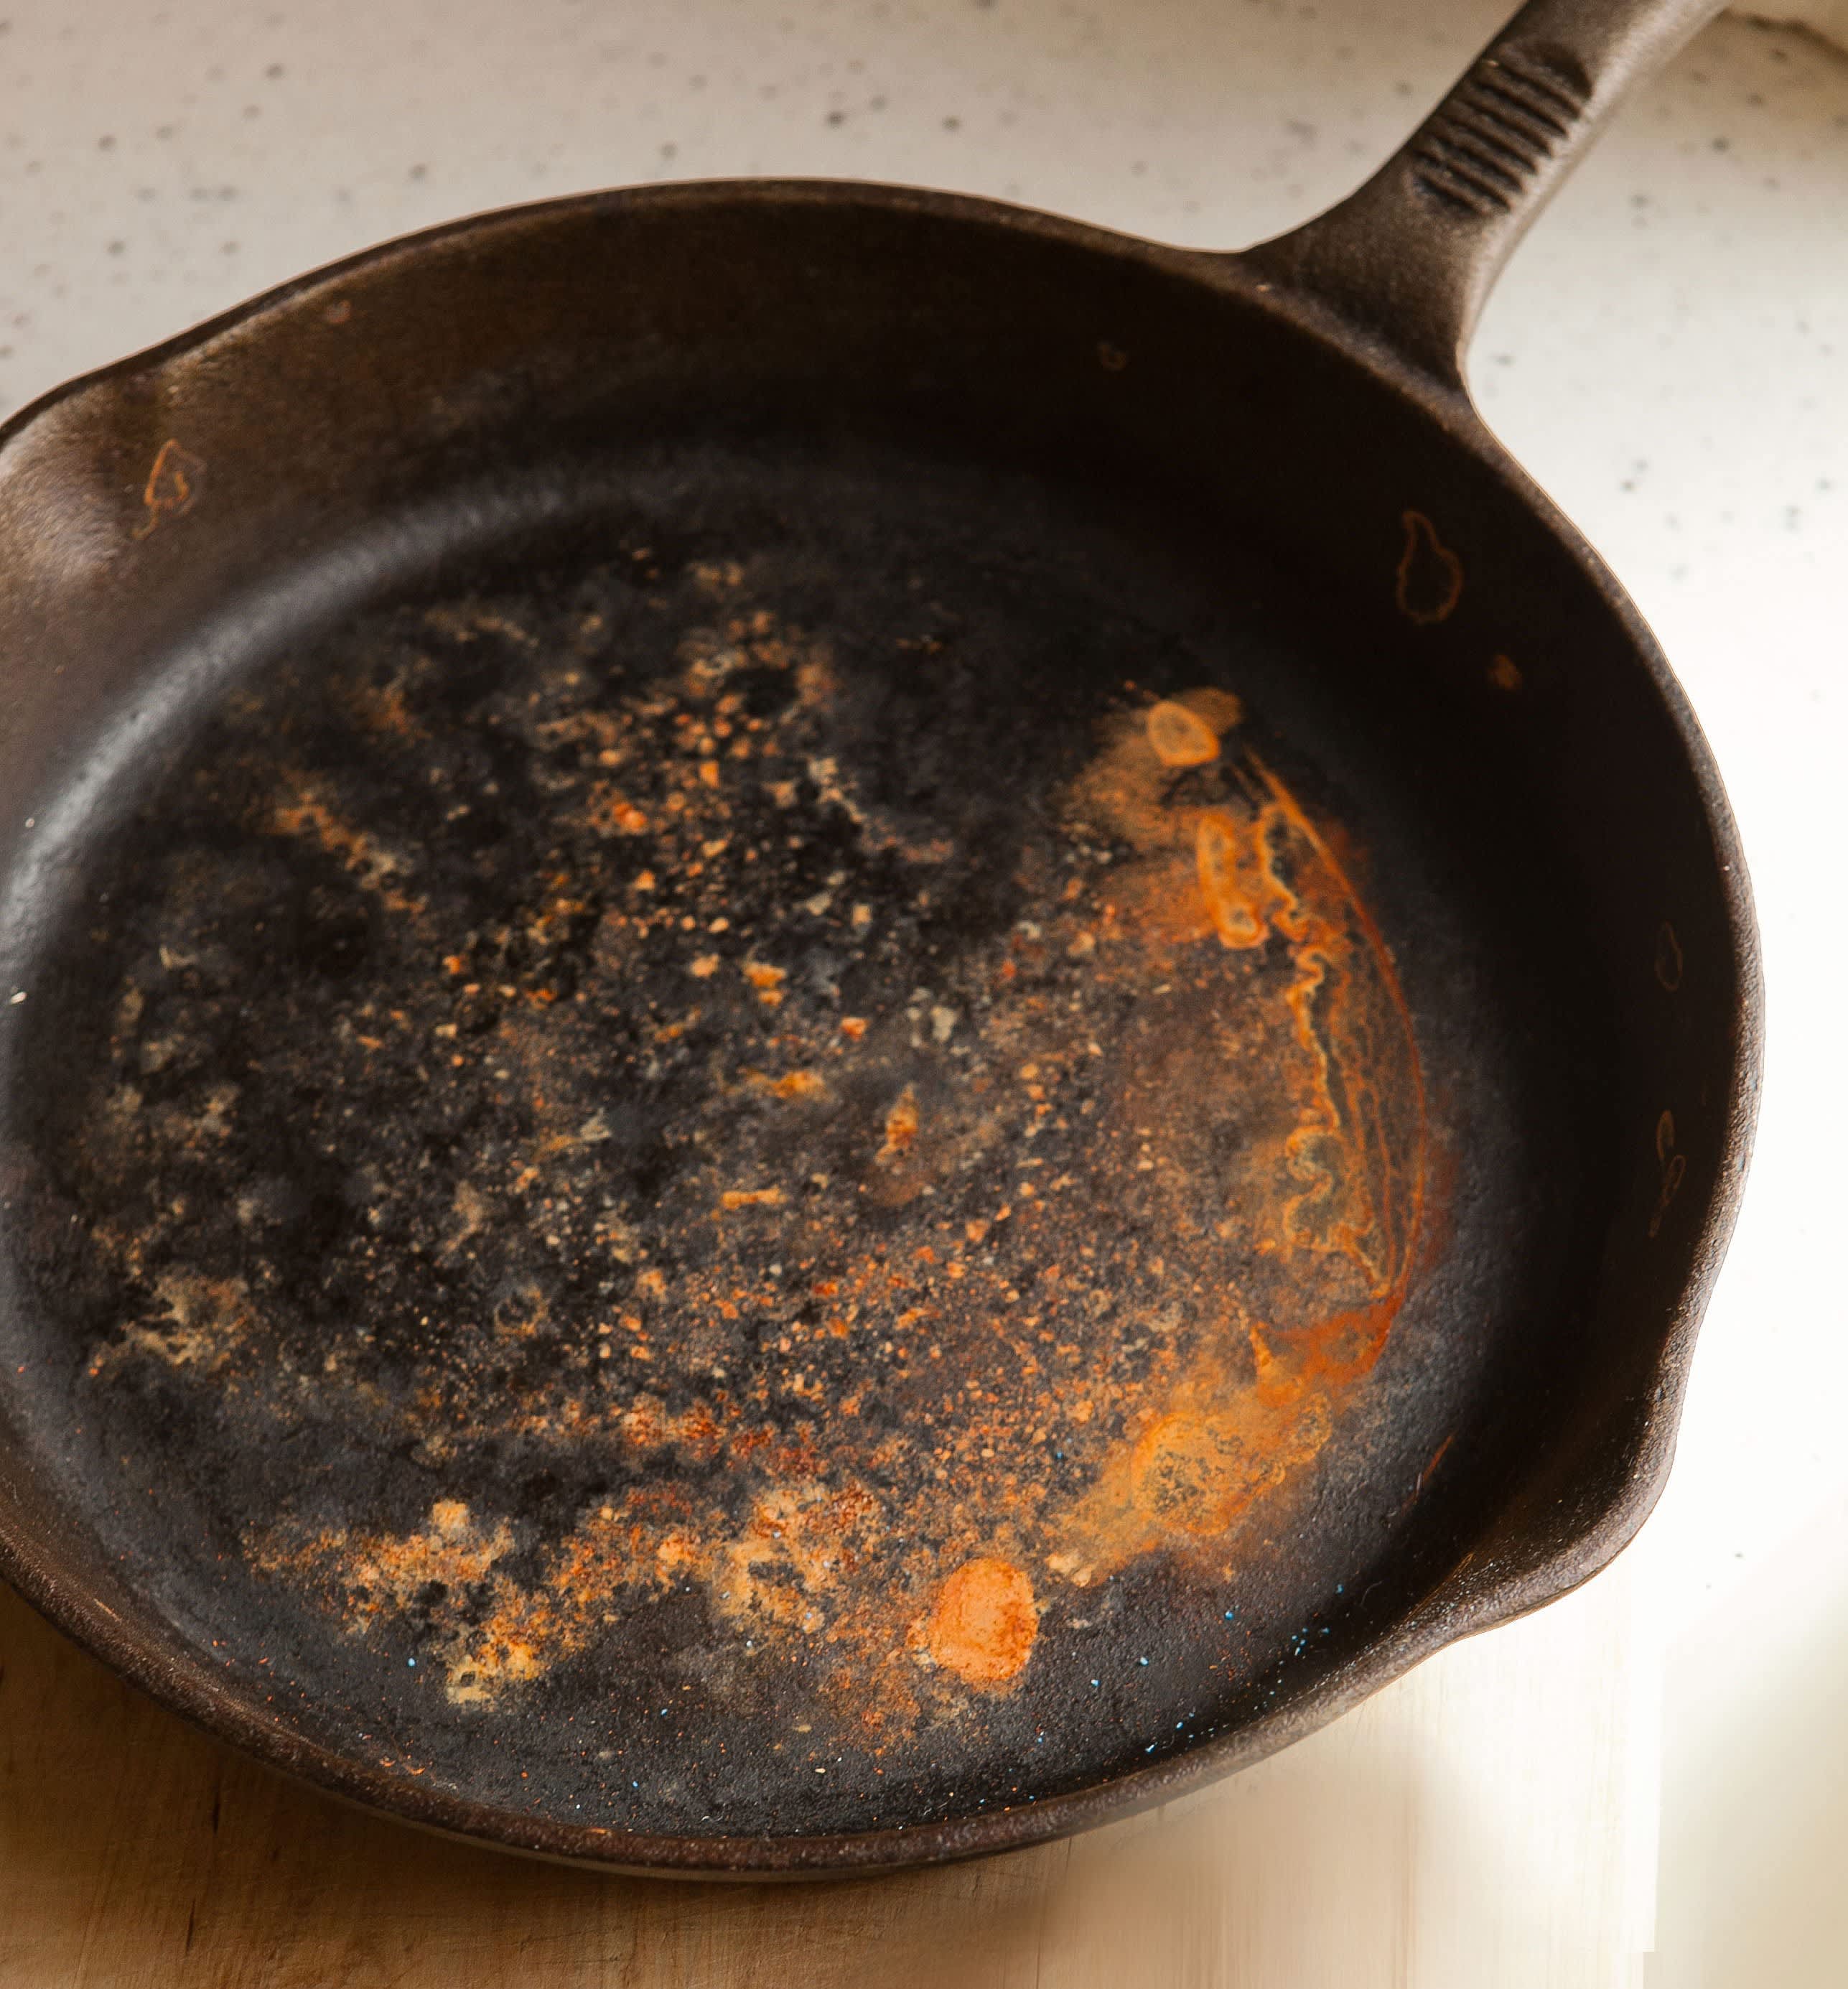 What Not To Cook In Cast Iron 4 Other Essential Cast Iron Pan Facts Kitchn,Pet Lizard Breeds